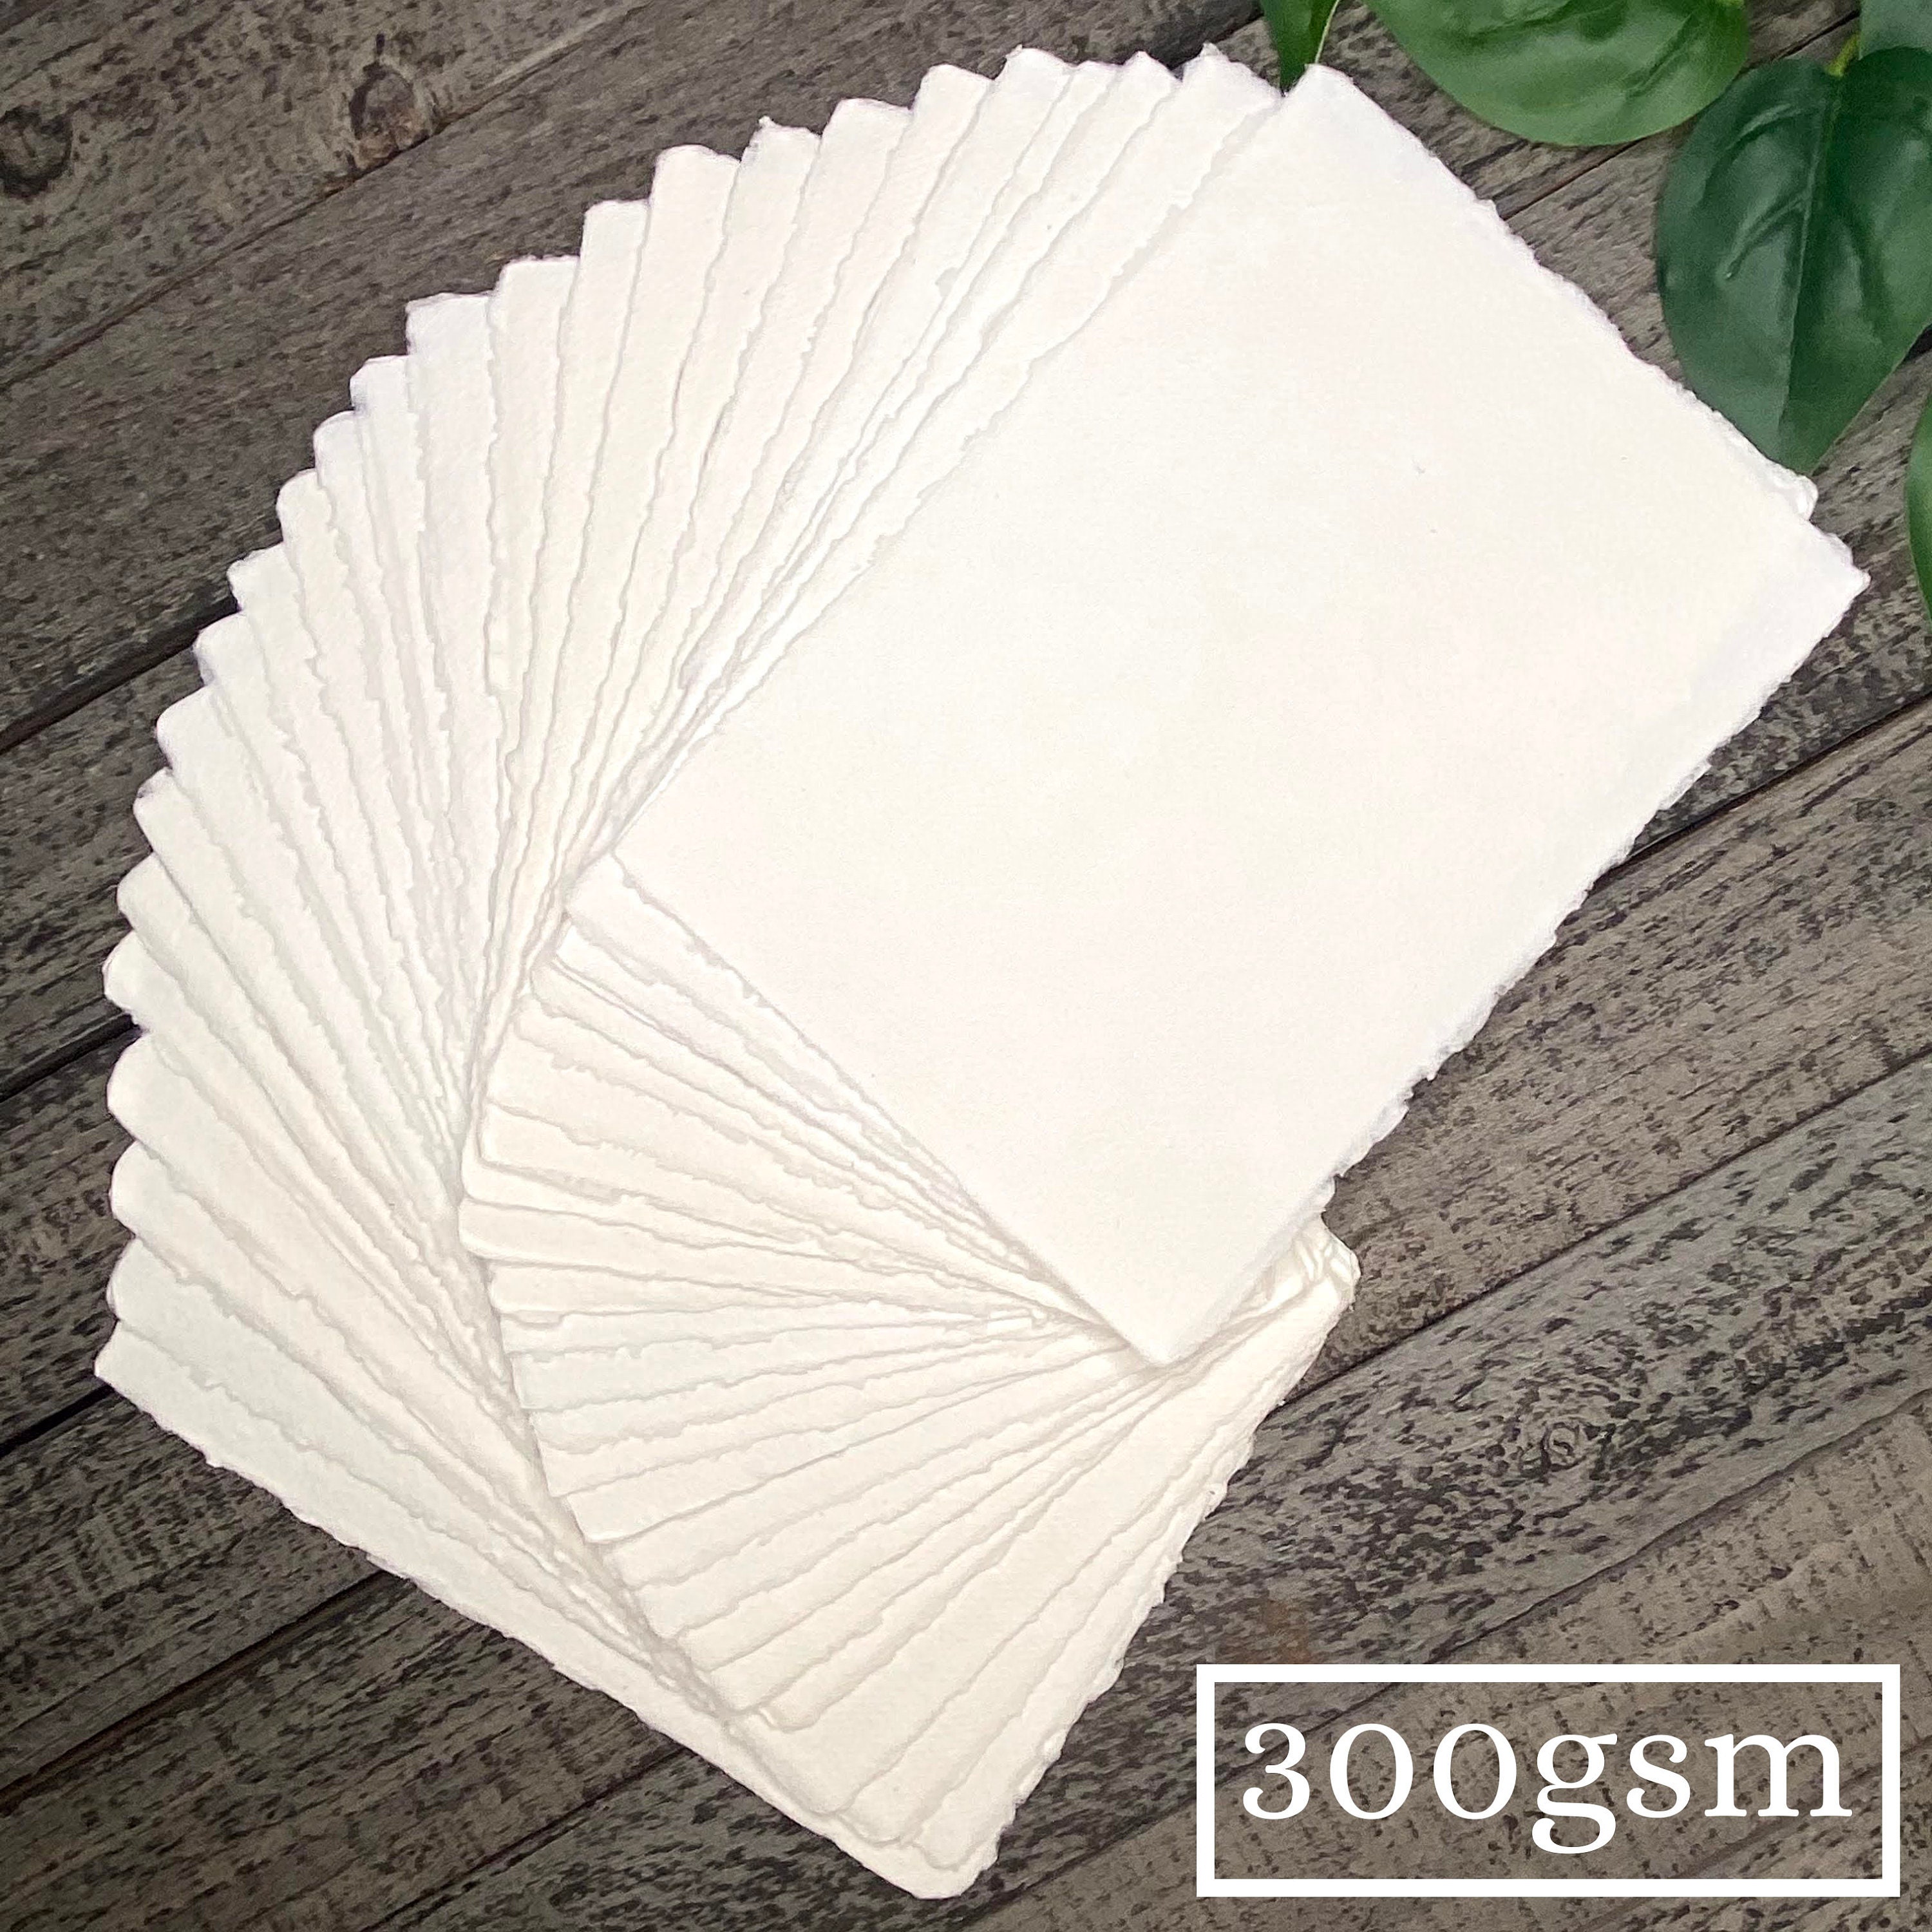 300gsm Handmade Cotton Paper, Set of 10 pieces - Deckle Edge, Perfect for  Weddings, Stationery, Art, Calligraphy, Watercolor - White/Ivory